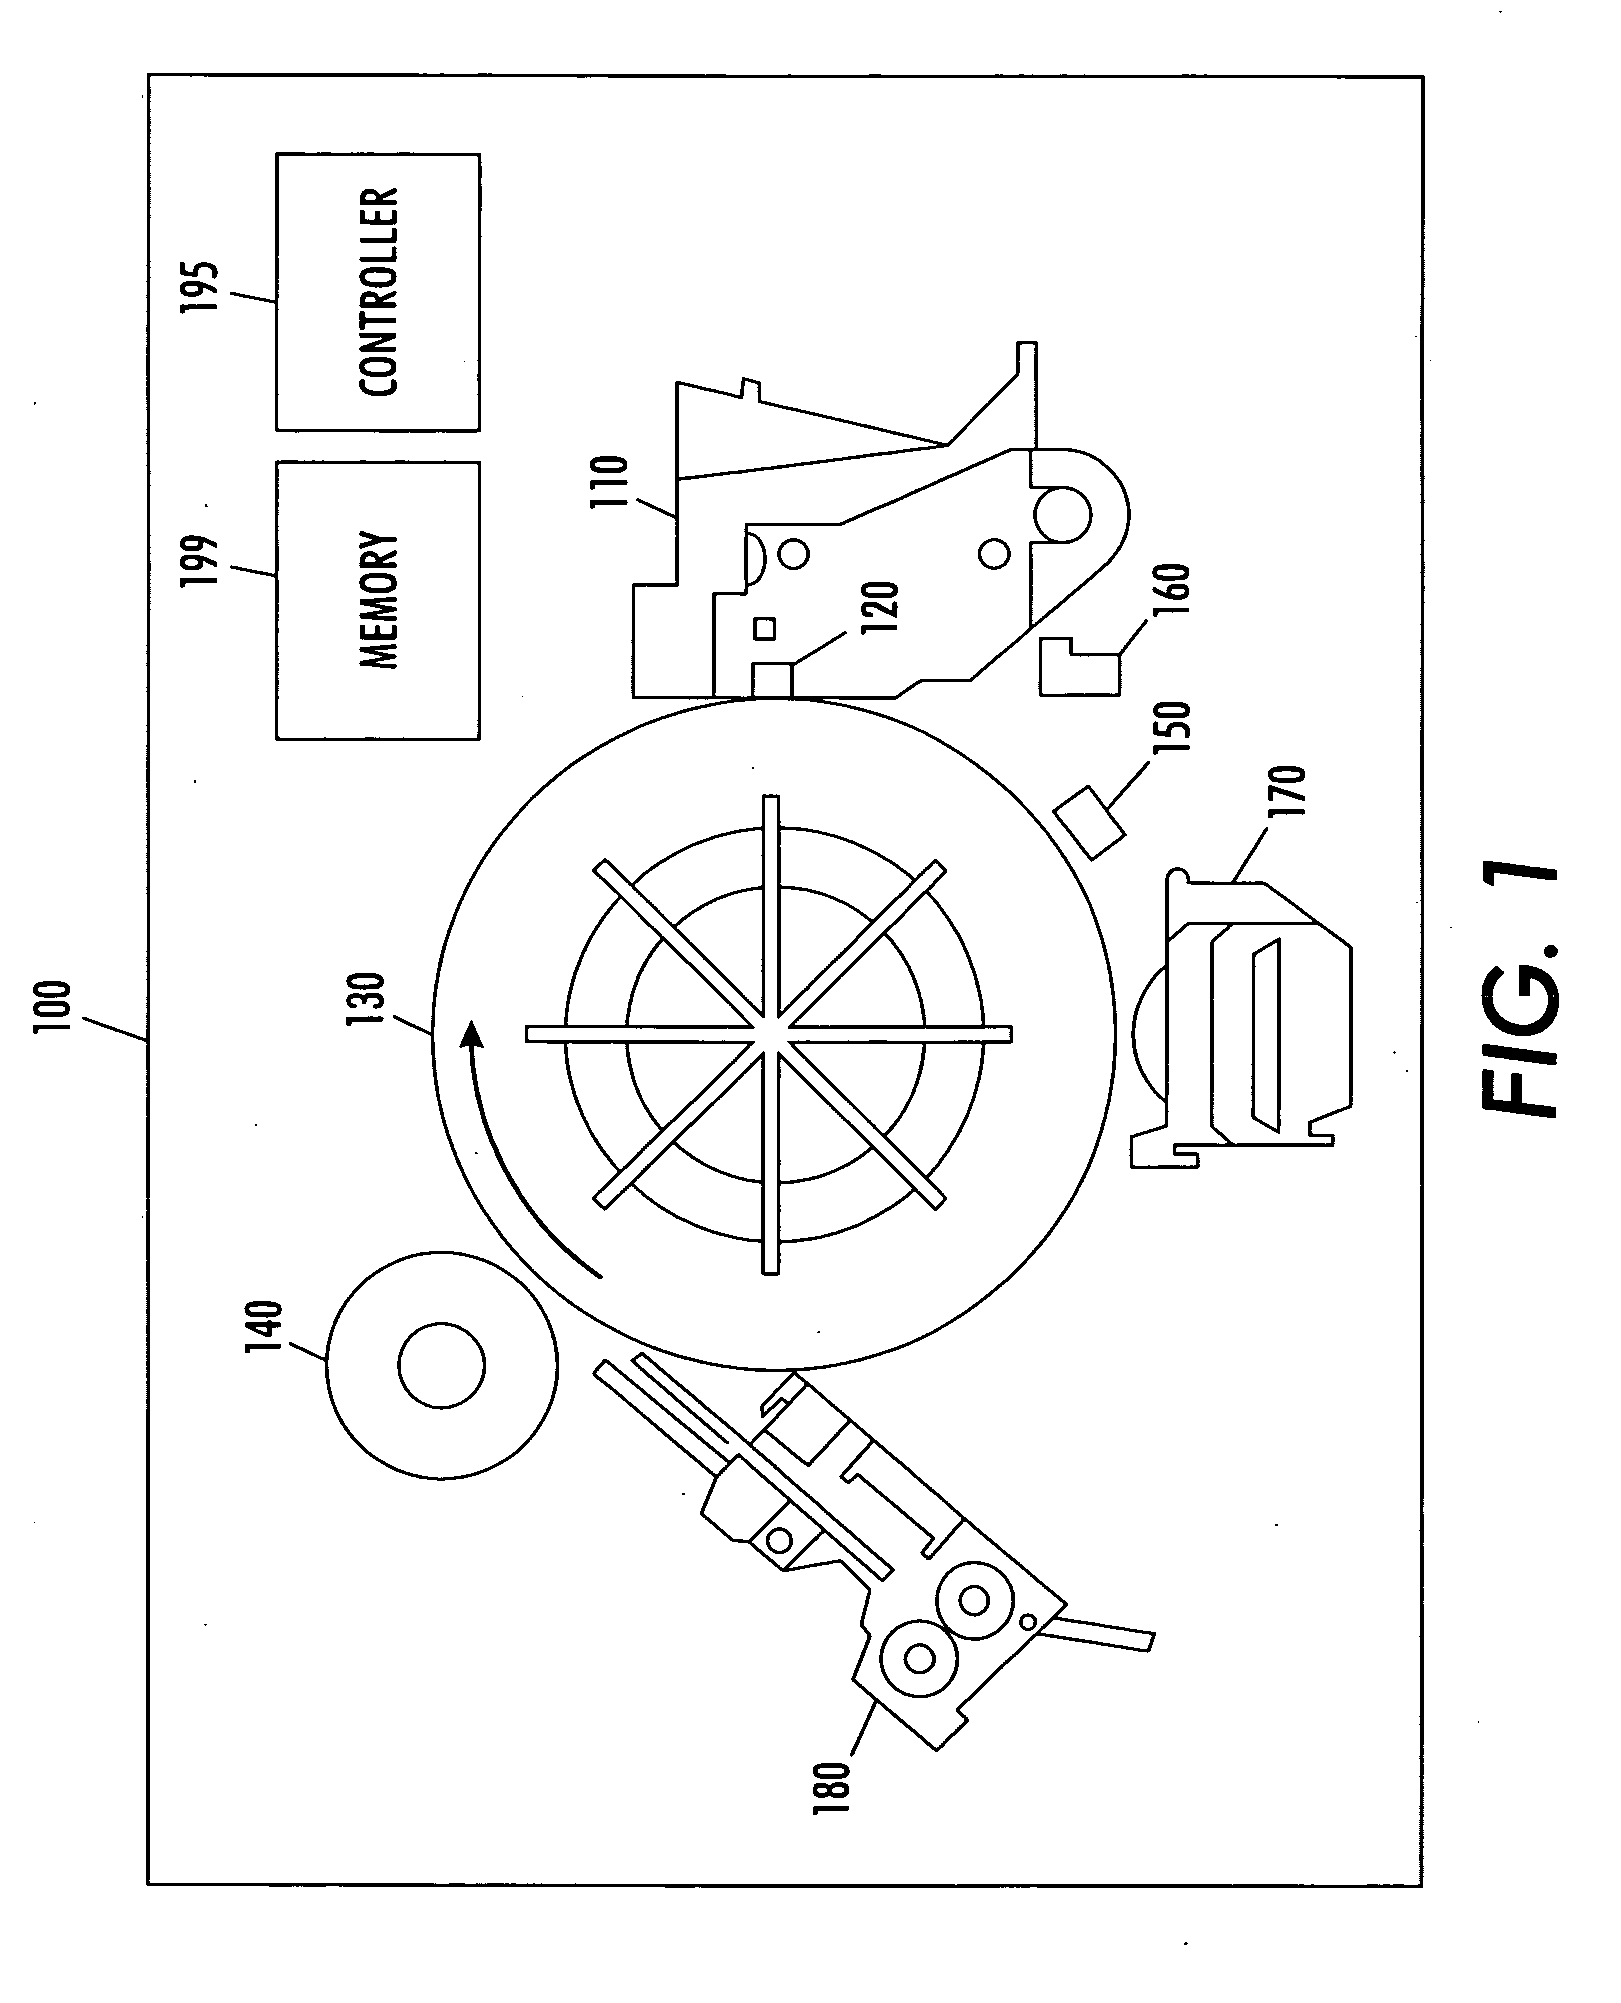 Systems and methods for detecting inkjet defects